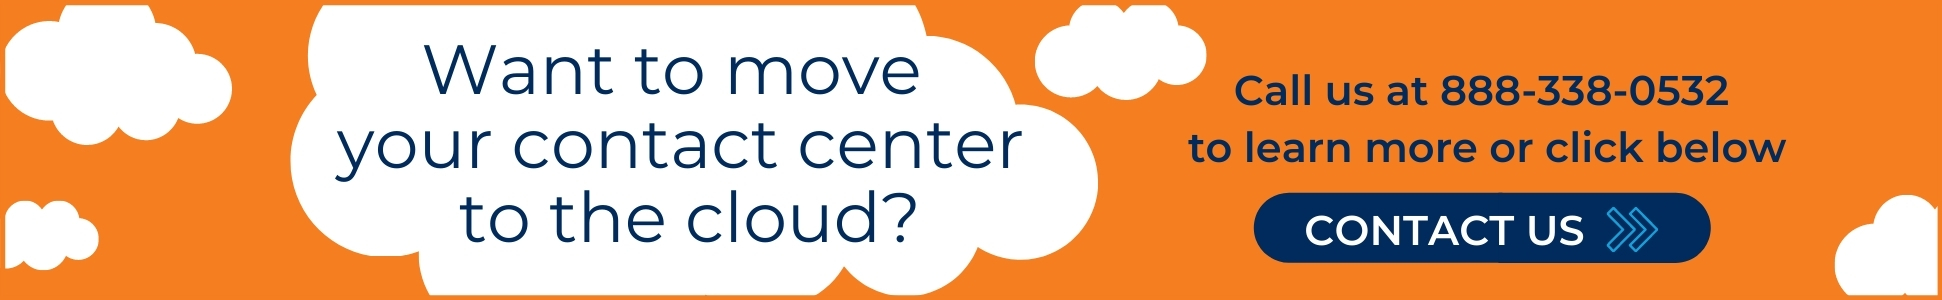 Want to move your contact center to the cloud?